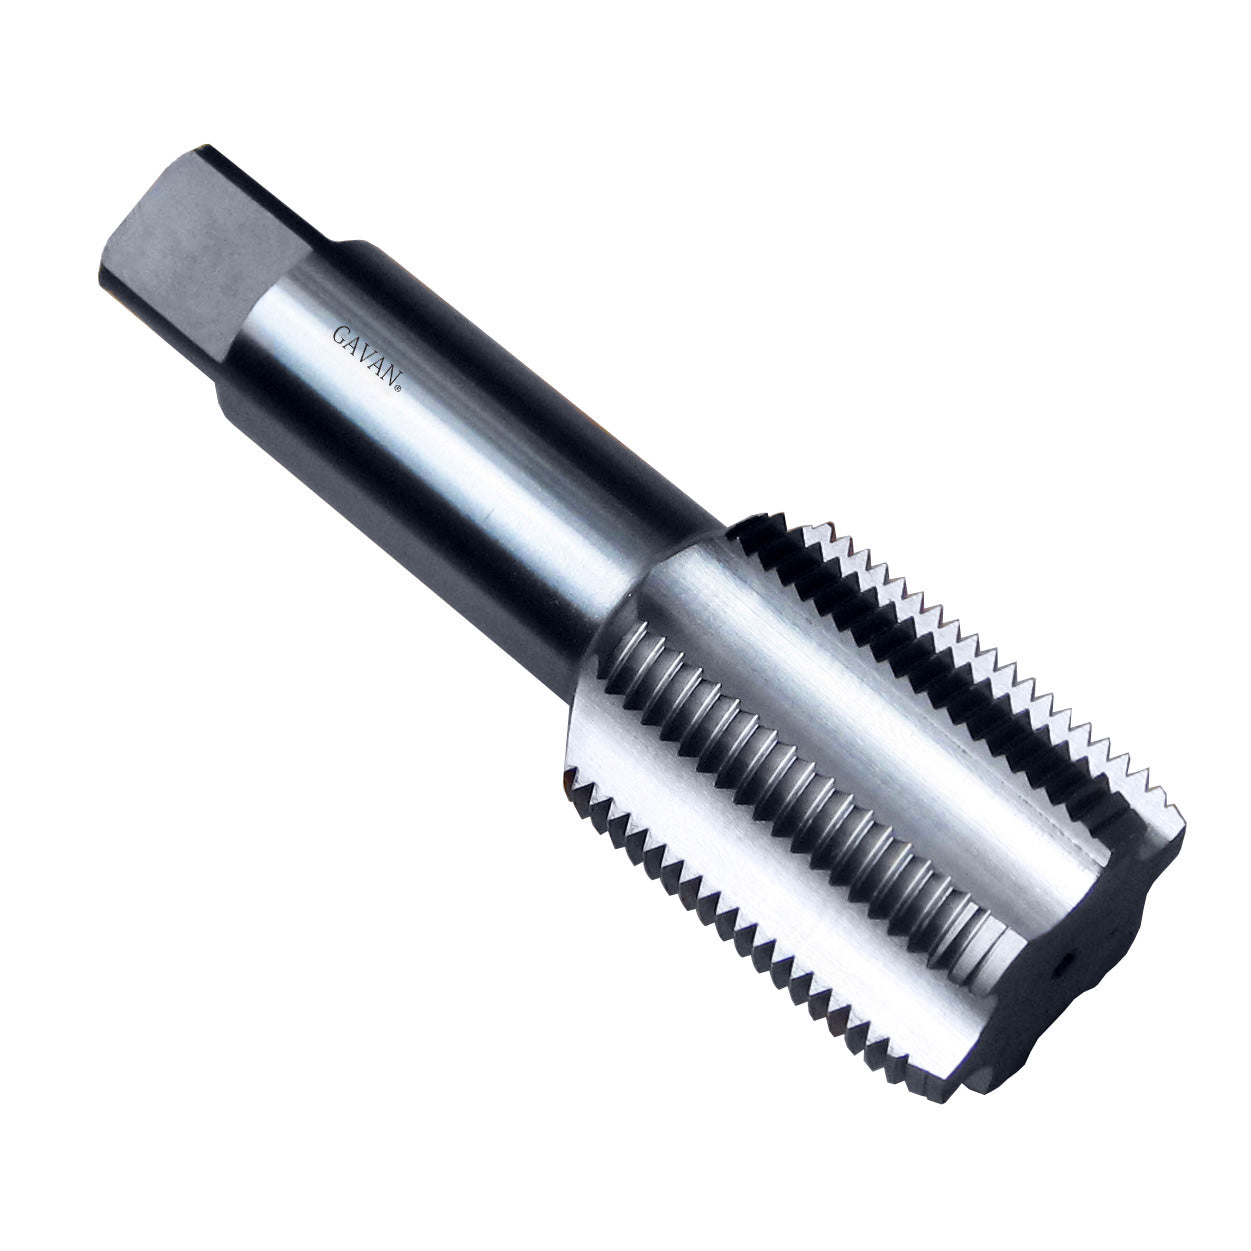 1 7/8" - 12 HSS Unified Right Hand Thread Tap